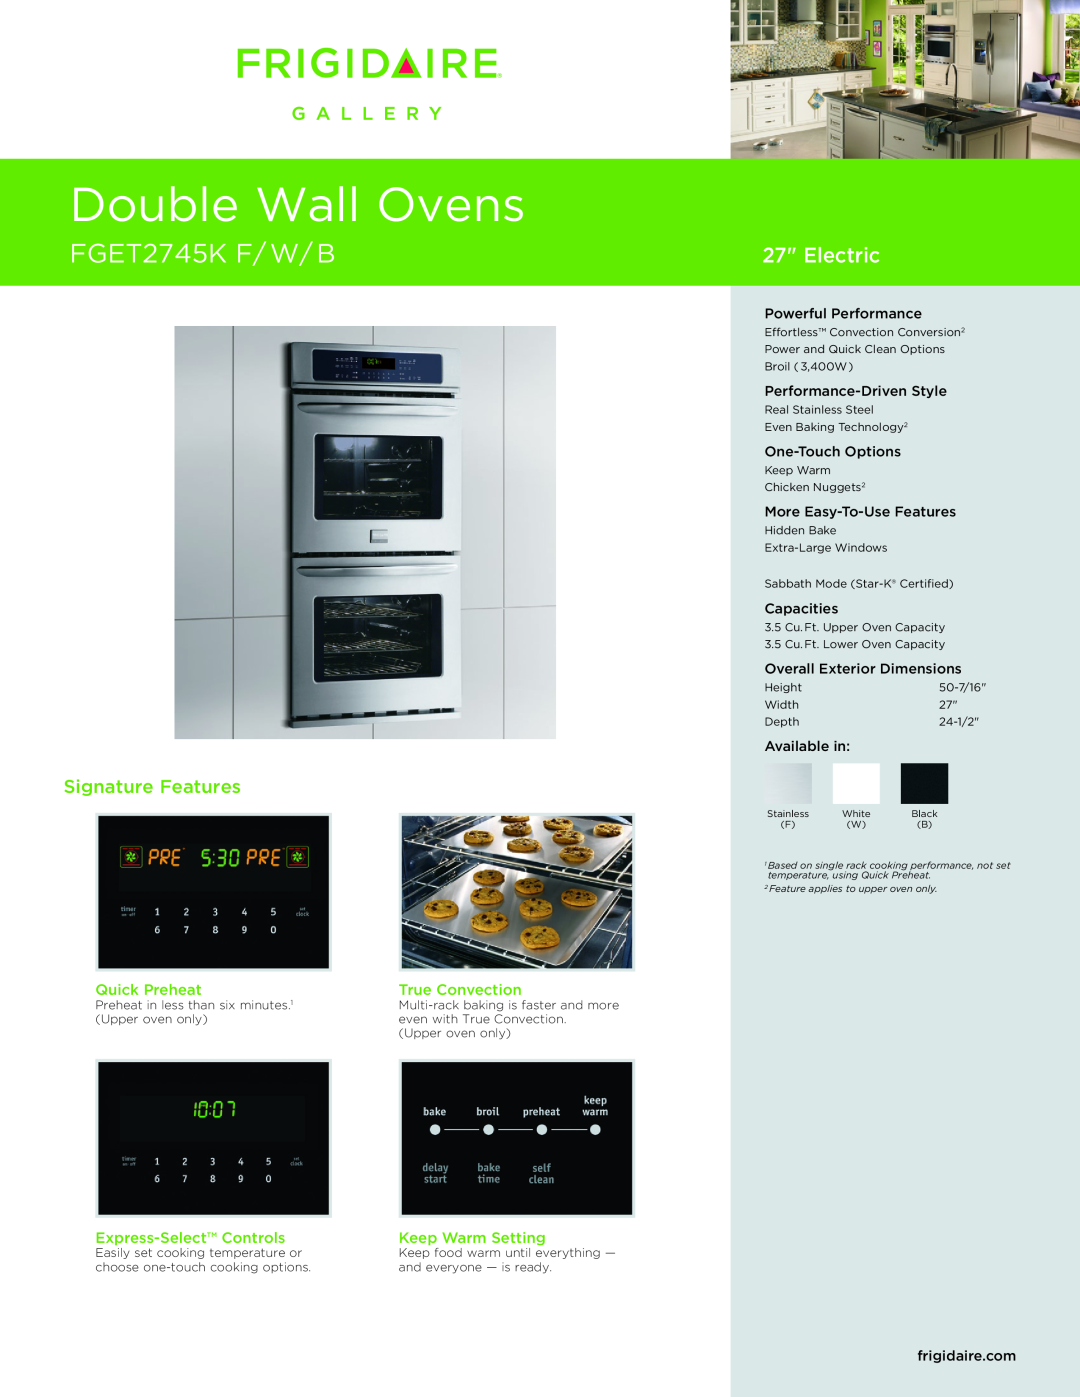 Frigidaire FGET2745KF dimensions Powerful Performance, Performance-DrivenStyle, One-TouchOptions, More Easy-To-UseFeatures 